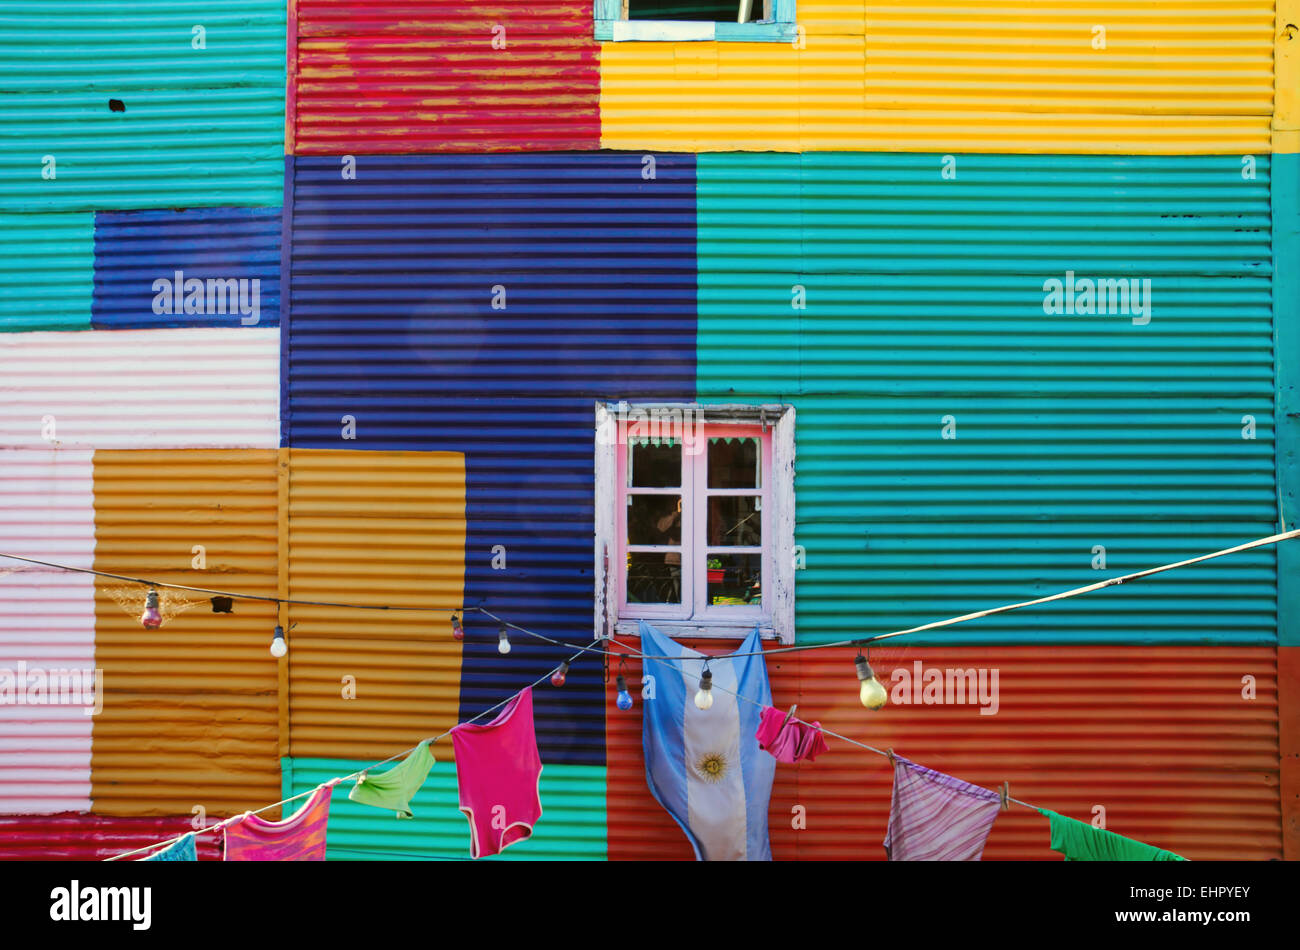 Typical wall in La Boca, Buenos Aires Stock Photo